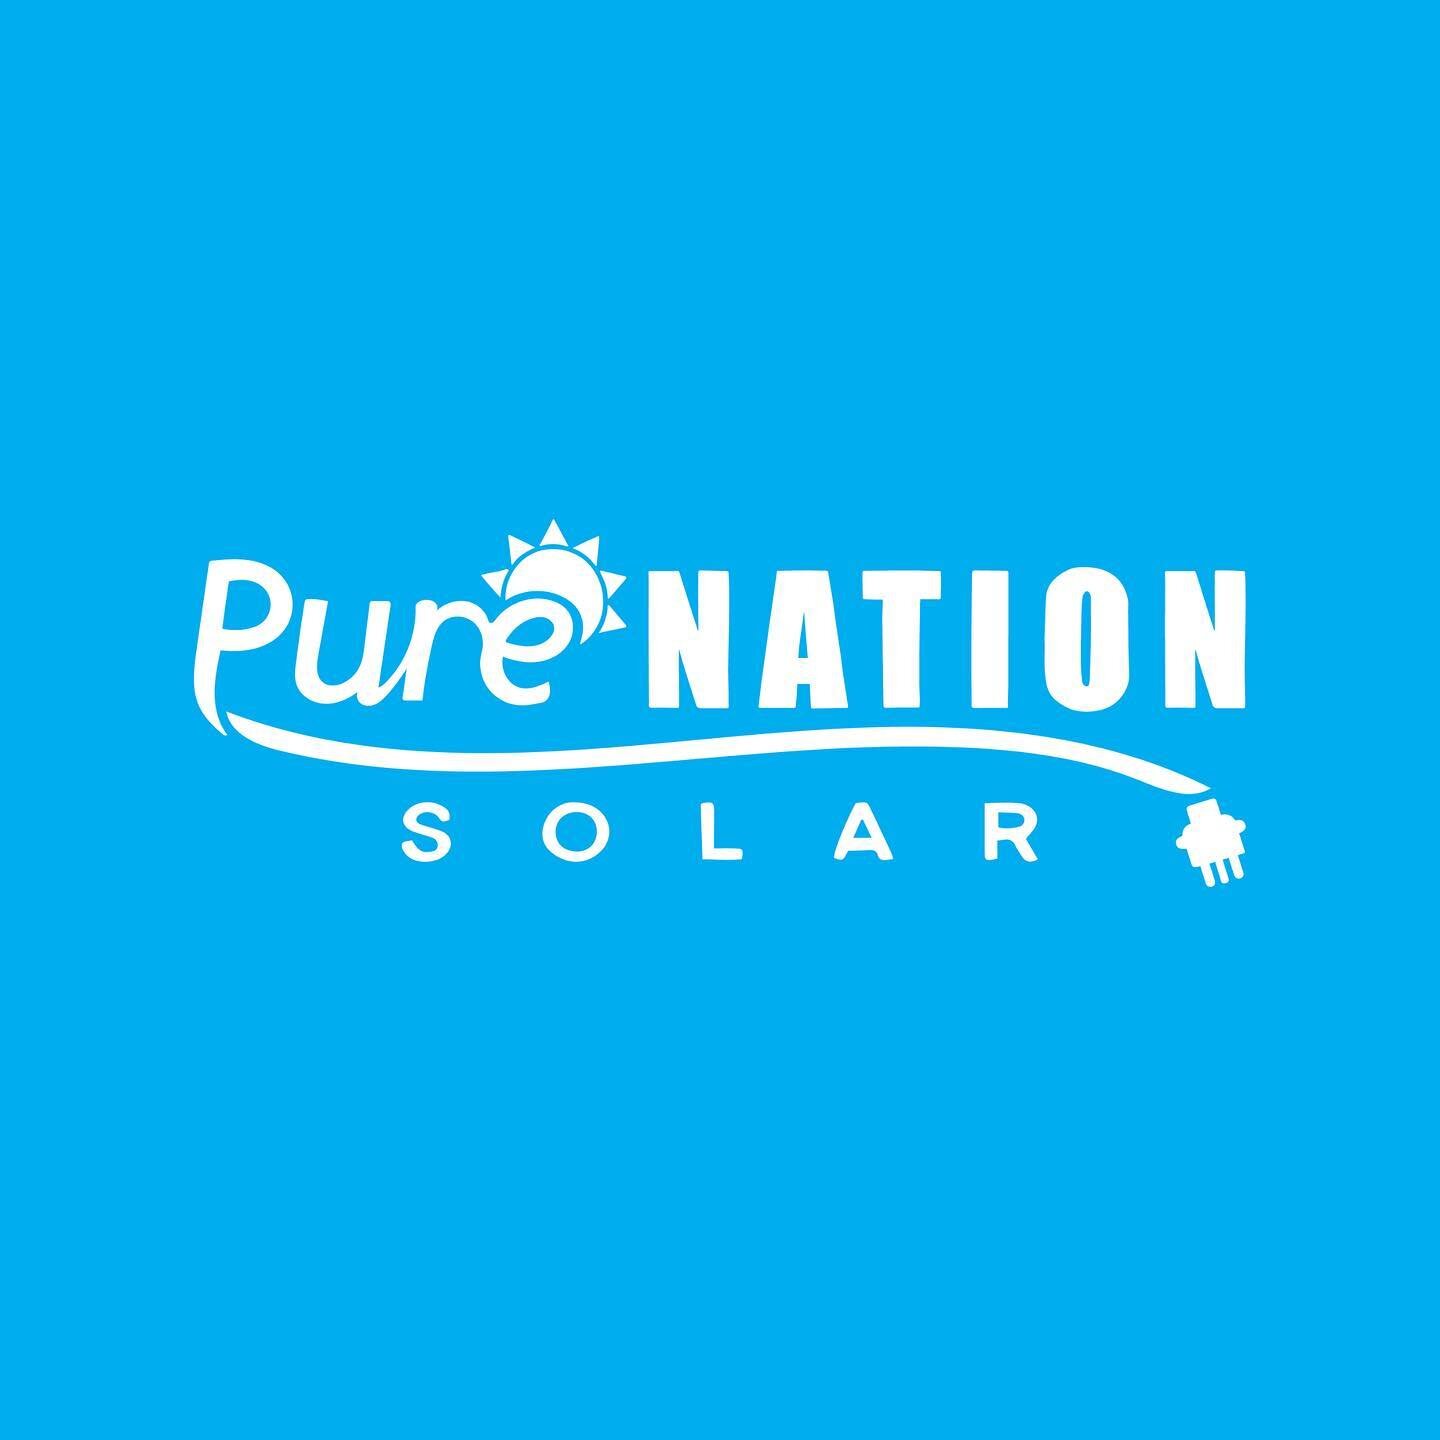 A new Logo Concept &amp; Design we created for PURE NATION SOLAR ☀️ Specialising in all residential and commercial solar projects. 
.
.
.
.
.
.
.
.
#krispconcepts #krispcreative #purenationsolar #solaraustralia  #solarpanels #solarinstallation #solar